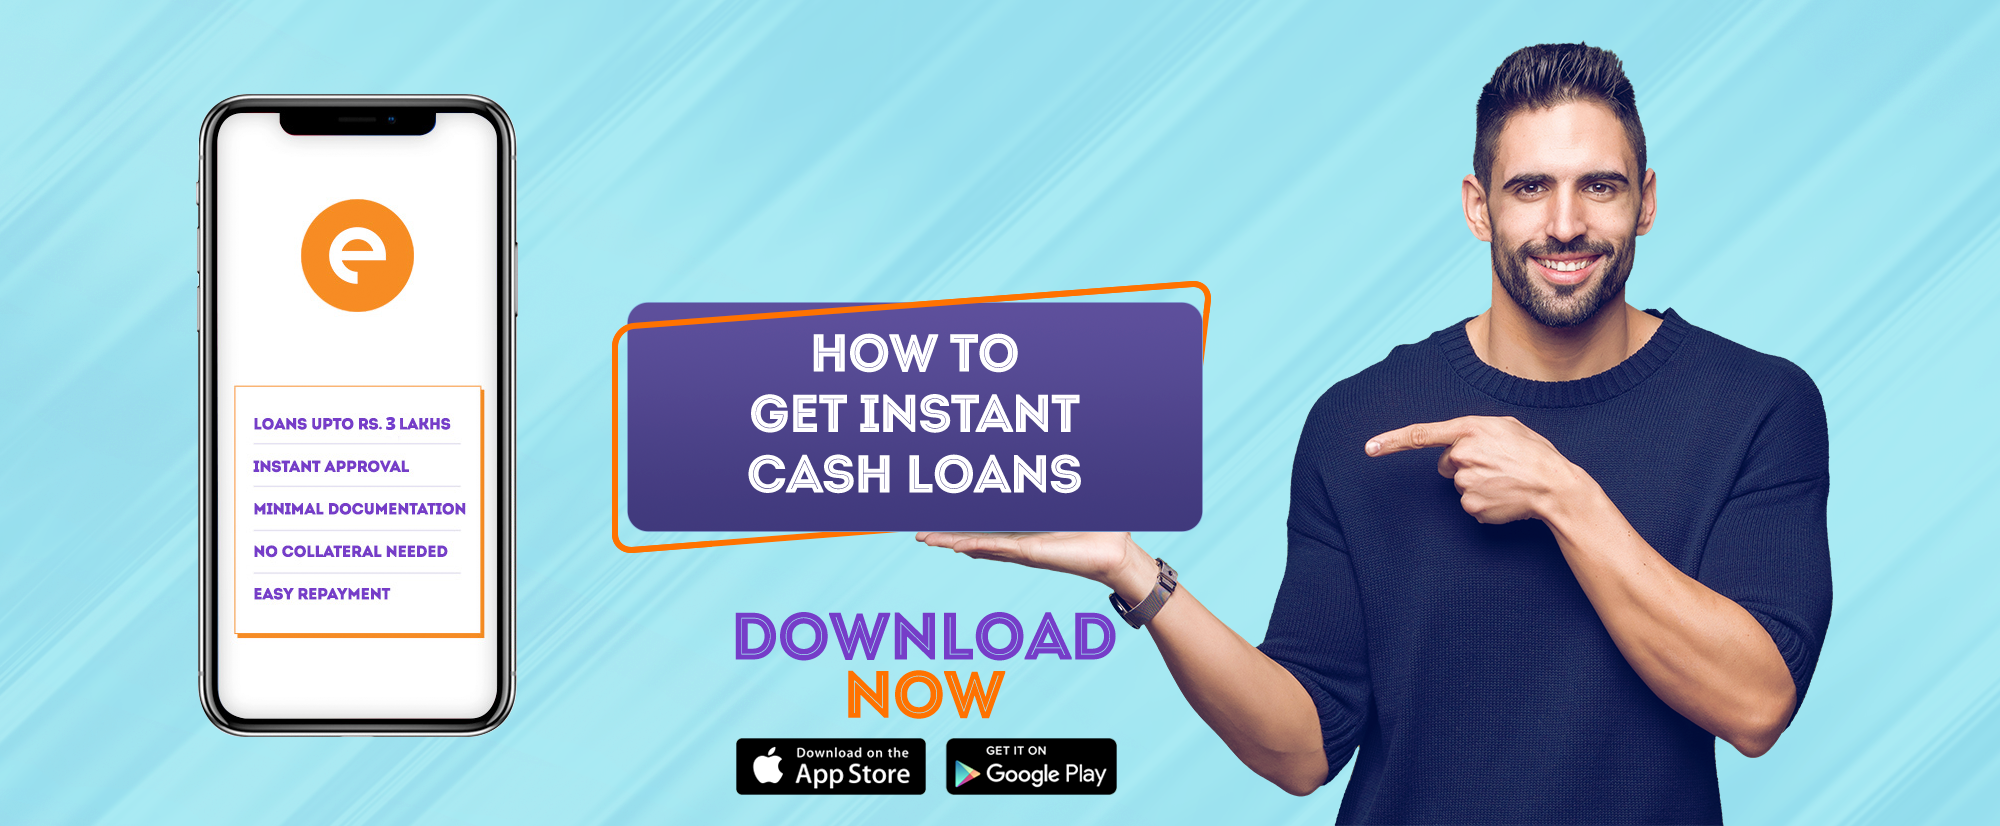 How to get Instant Cash Loans